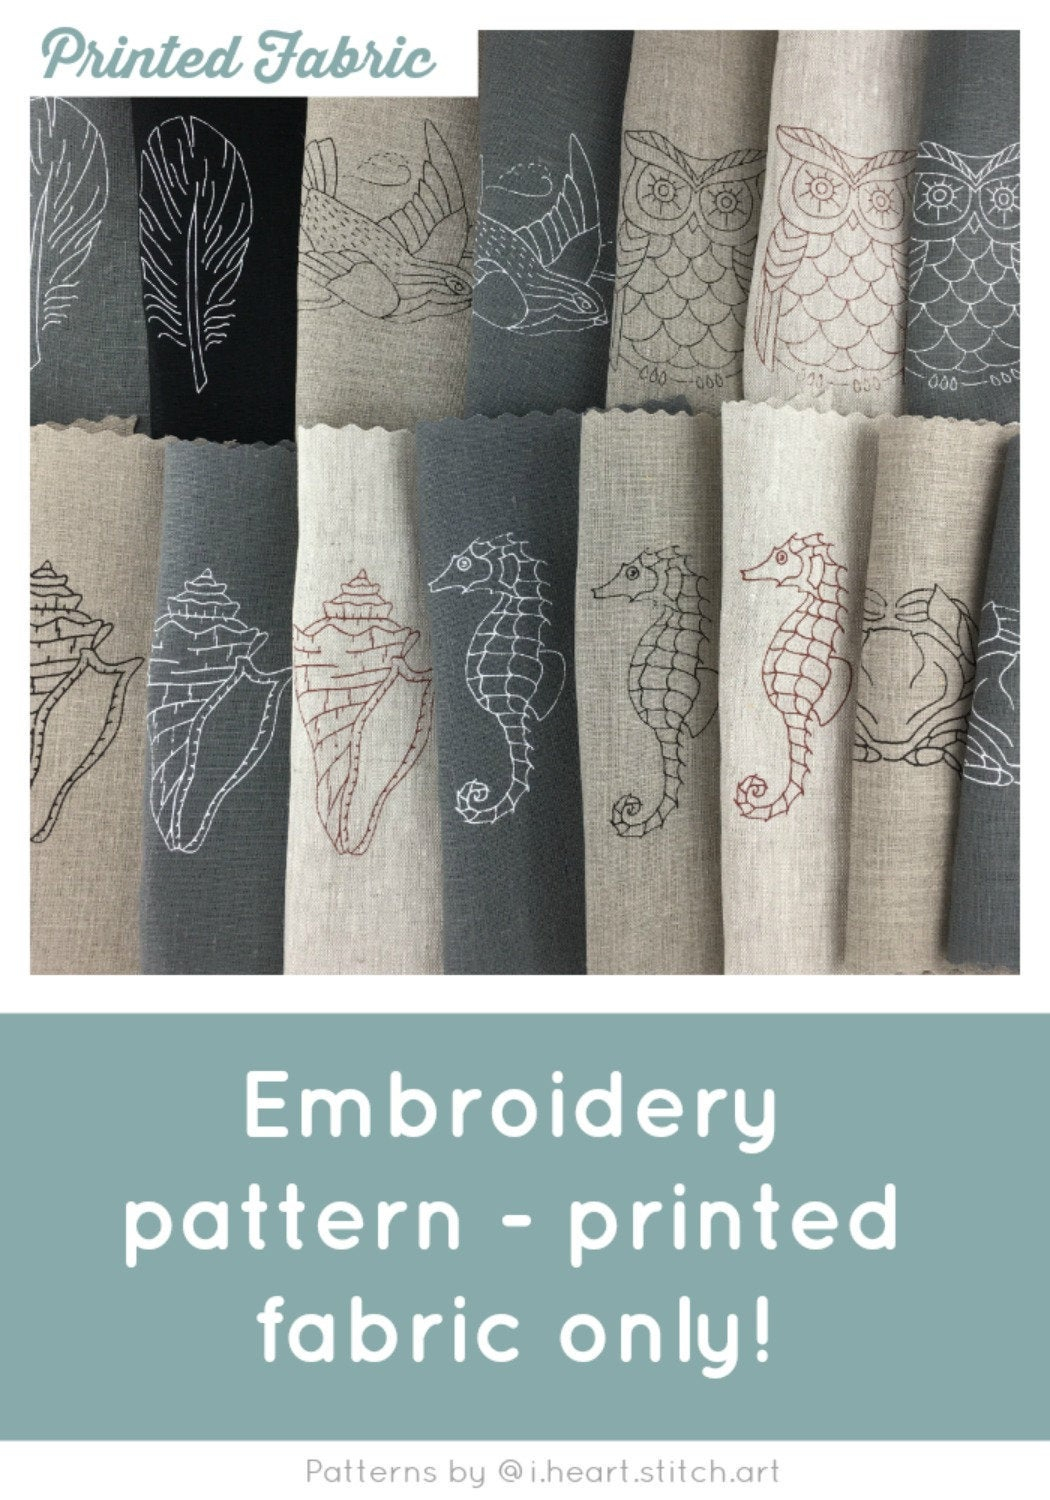 Stamped Embroidery Patterns Printed Embroidery Pattern Hand Embroidery Pattern On Fabric